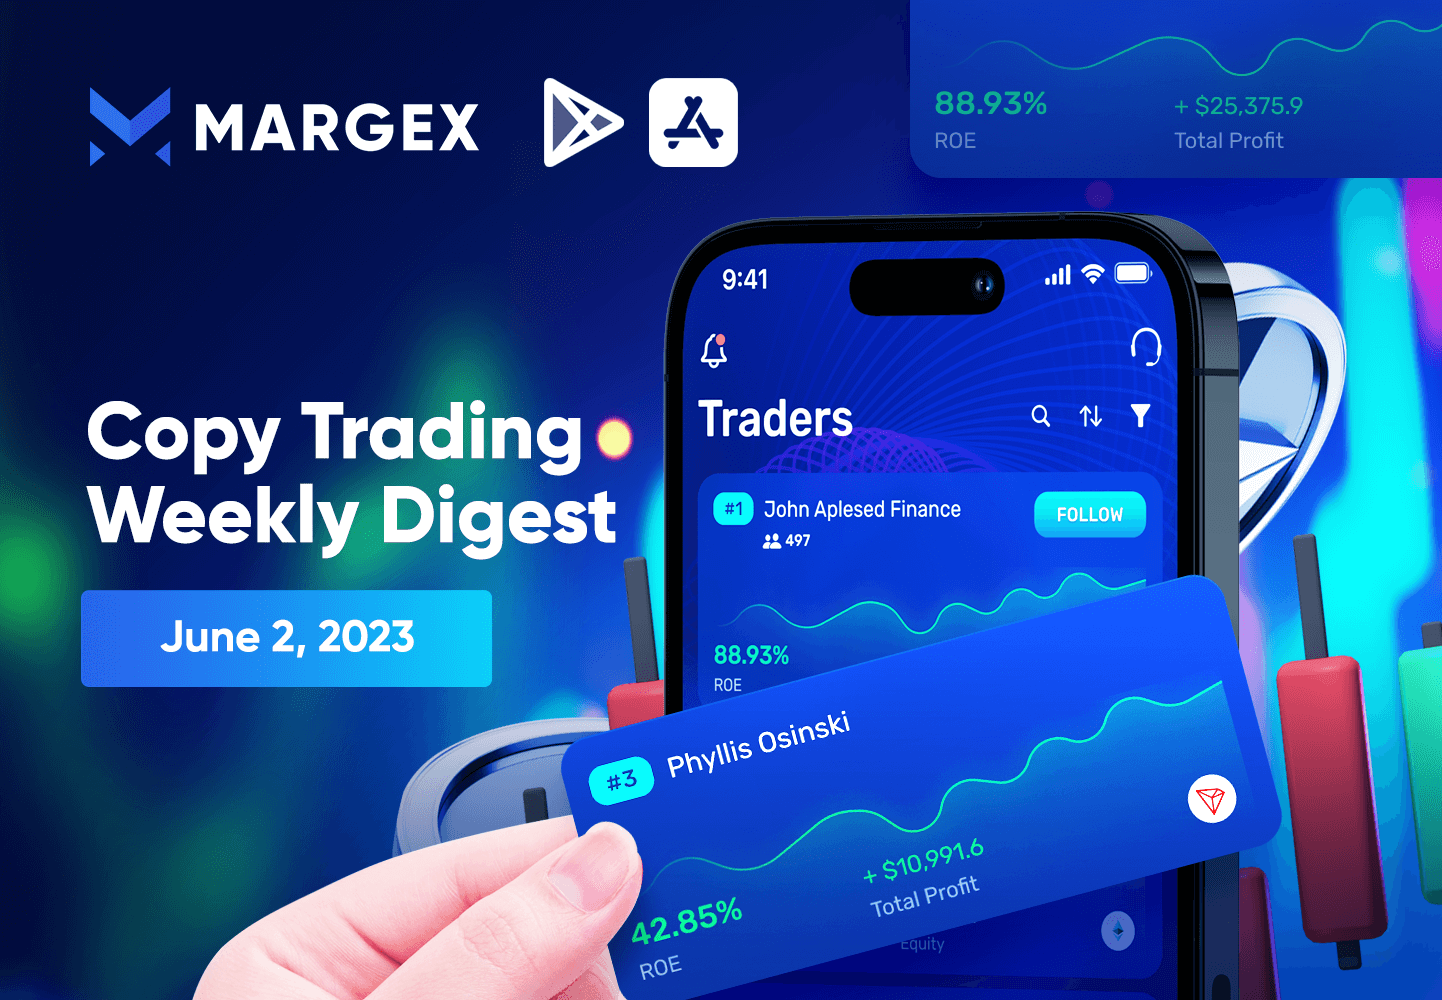 Copy Trading Weekly Digest: June 2, 2023